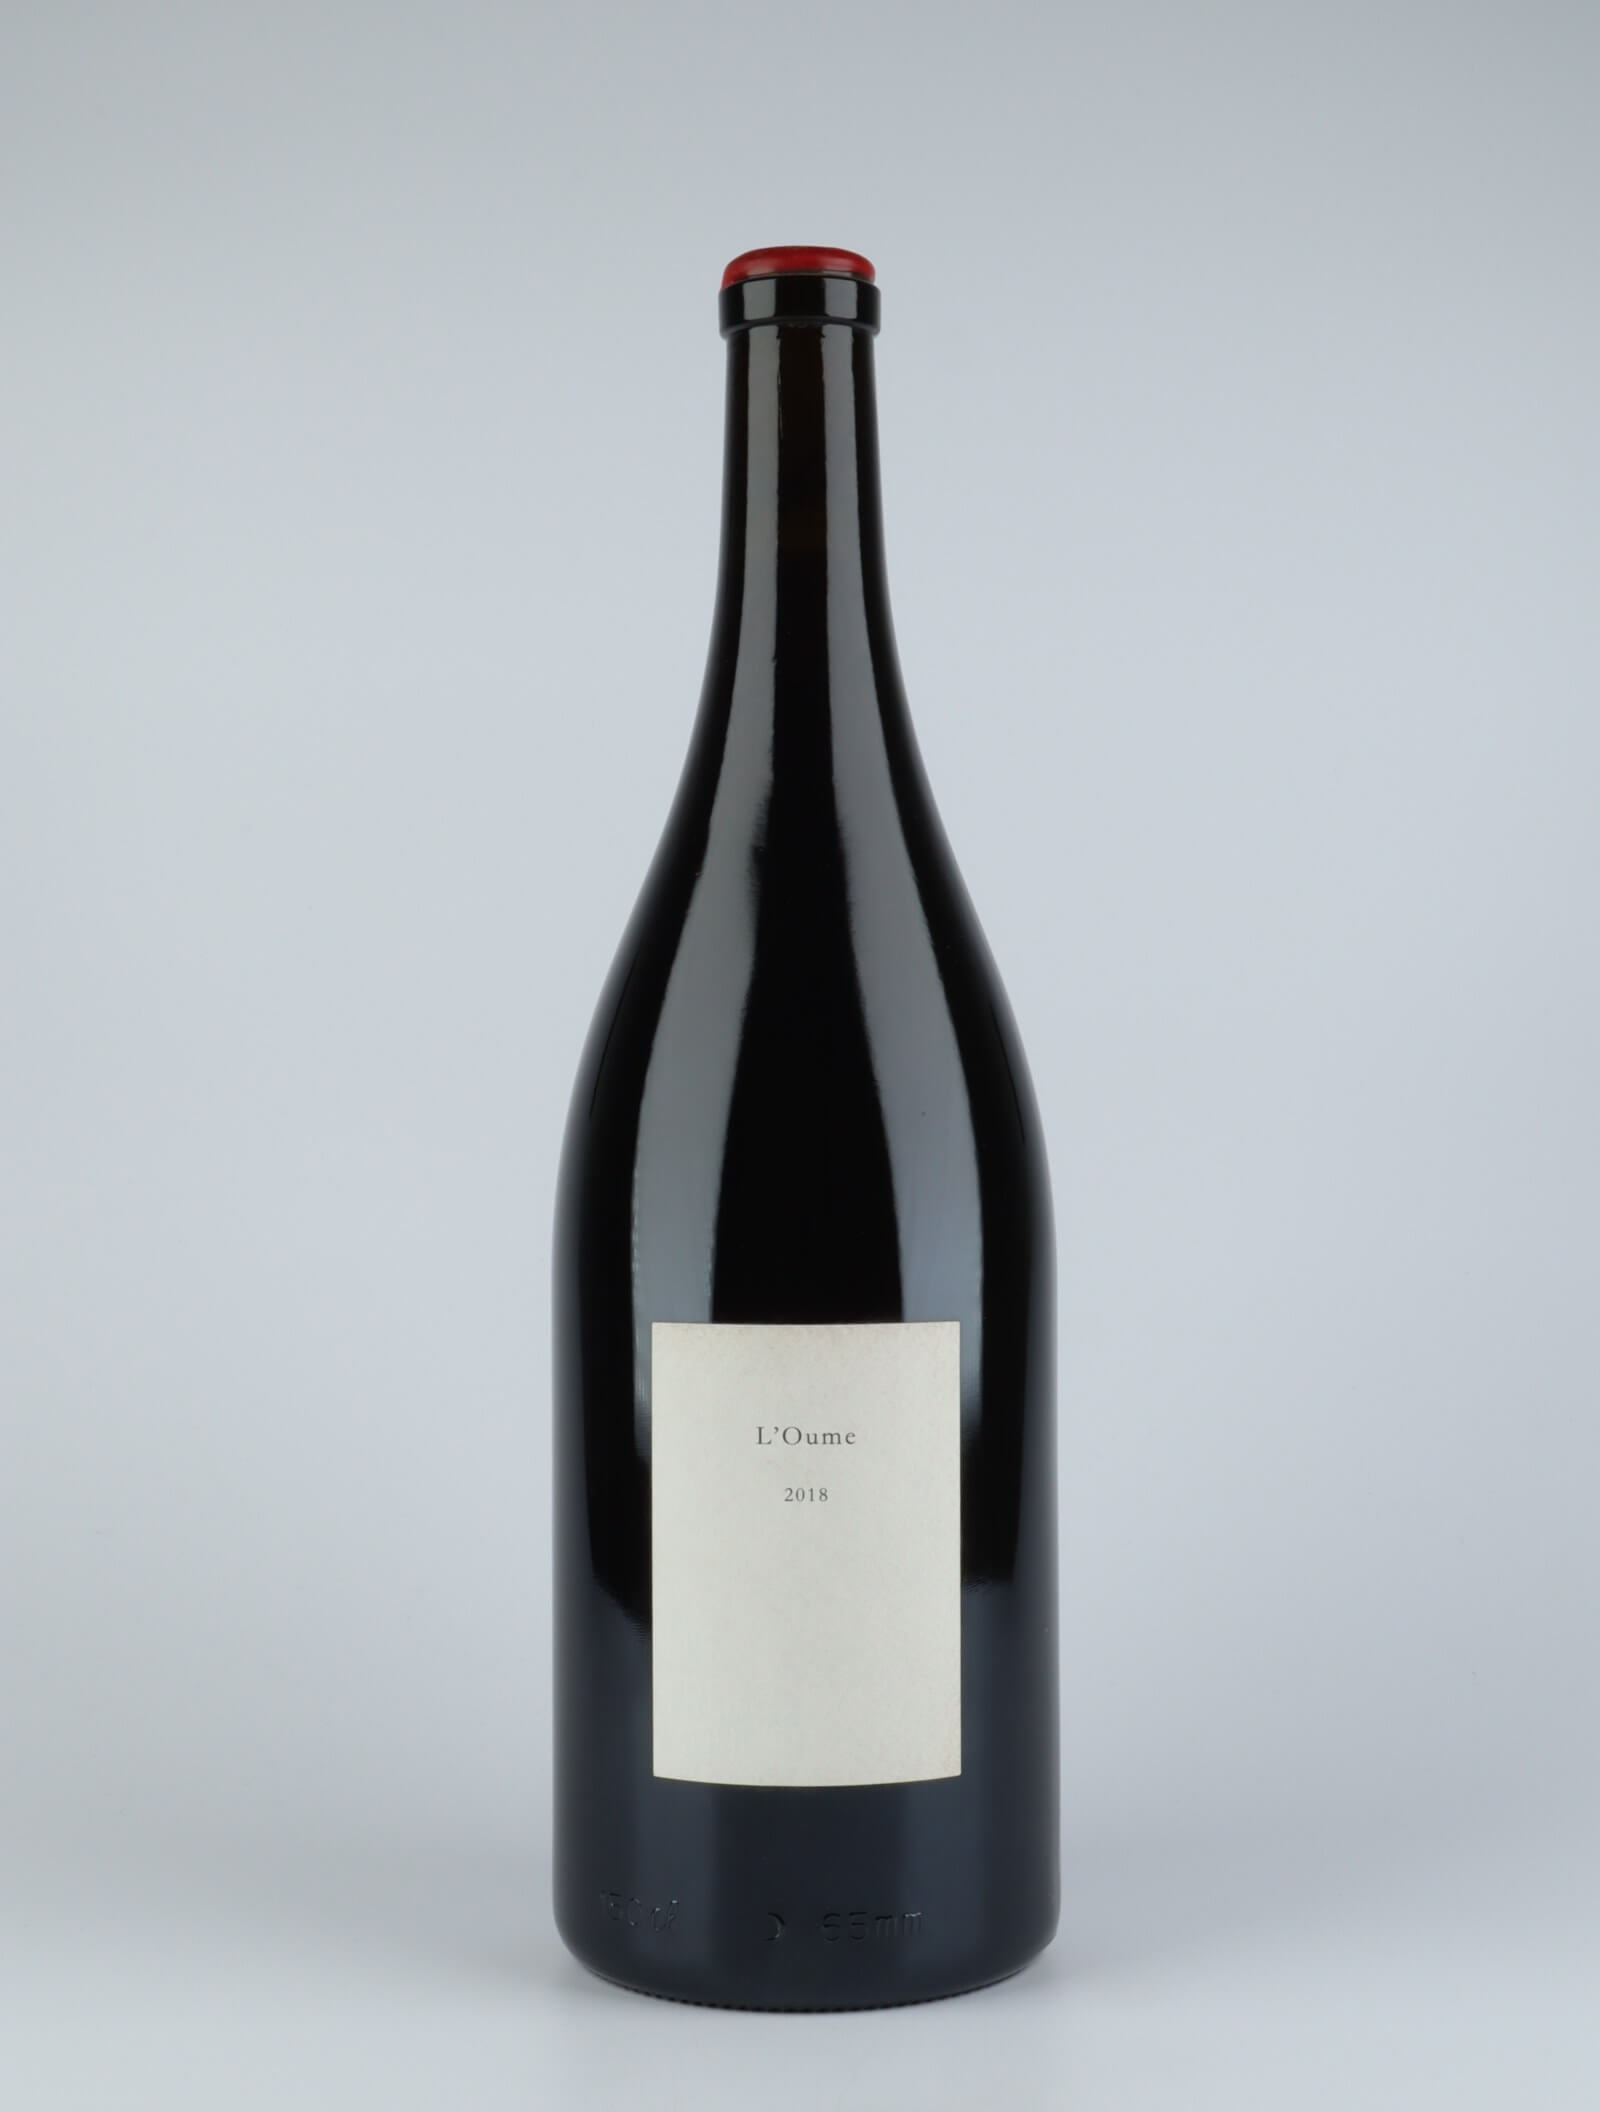 A bottle 2018 L'Oume Red wine from Les Frères Soulier, Rhône in France